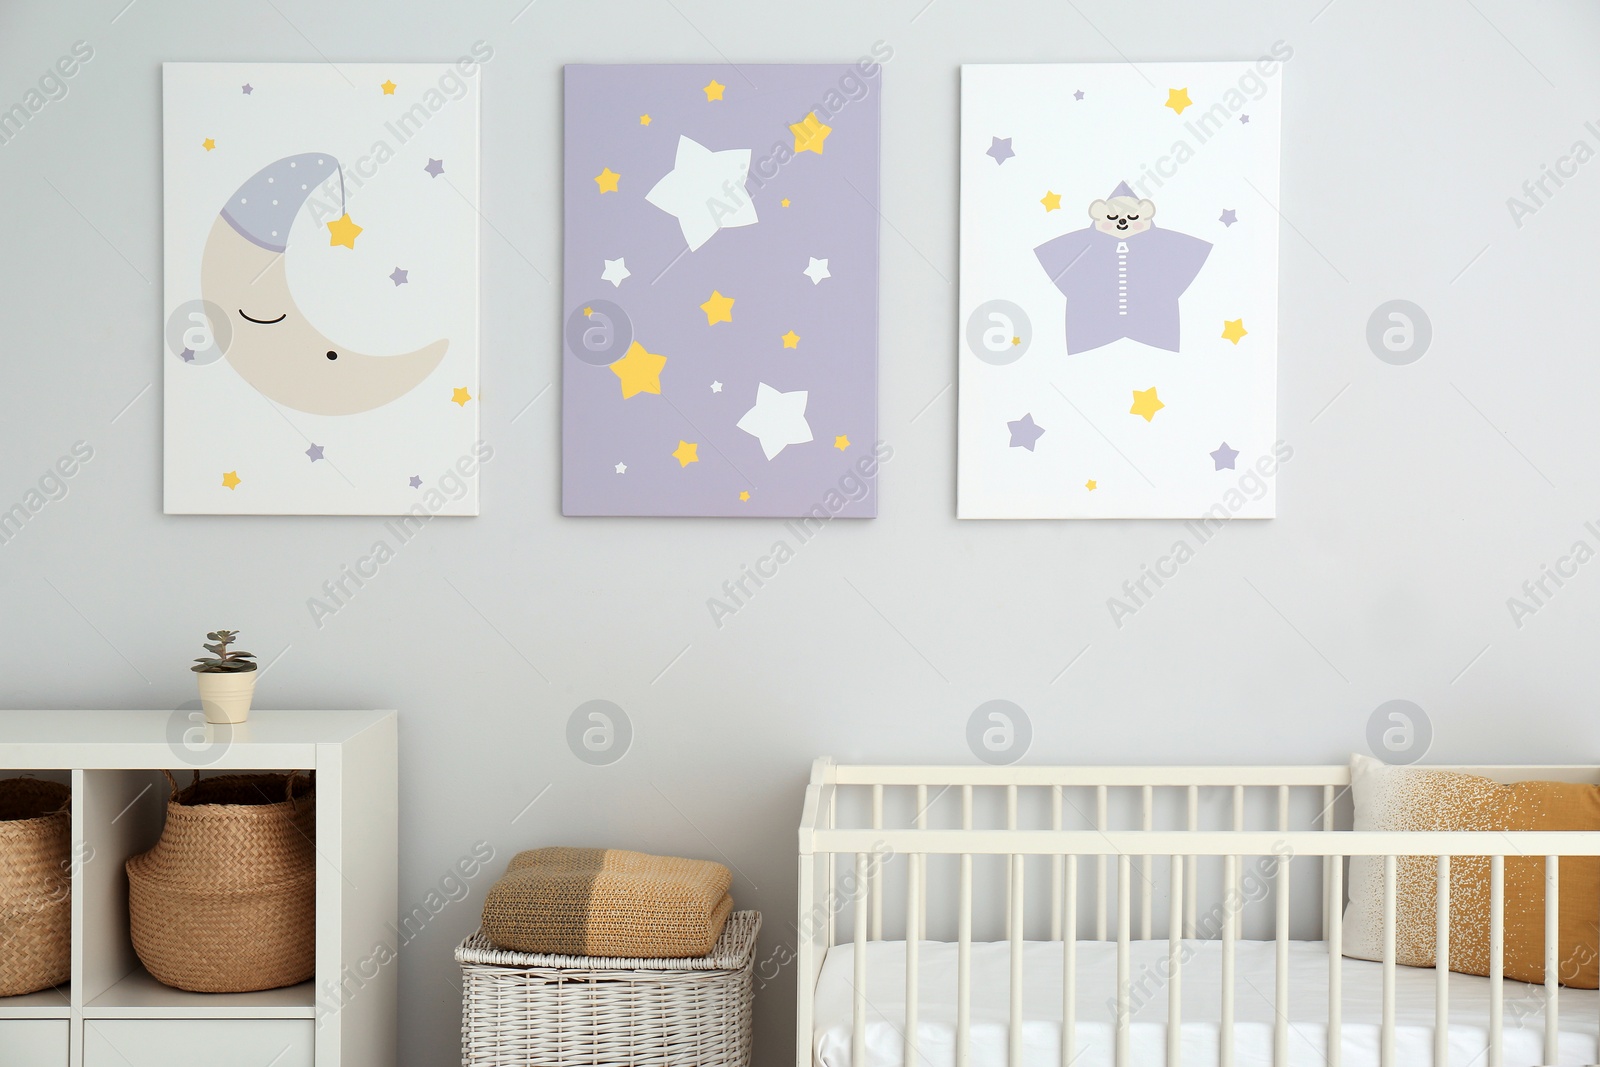 Photo of Baby room interior with crib and cute posters on wall